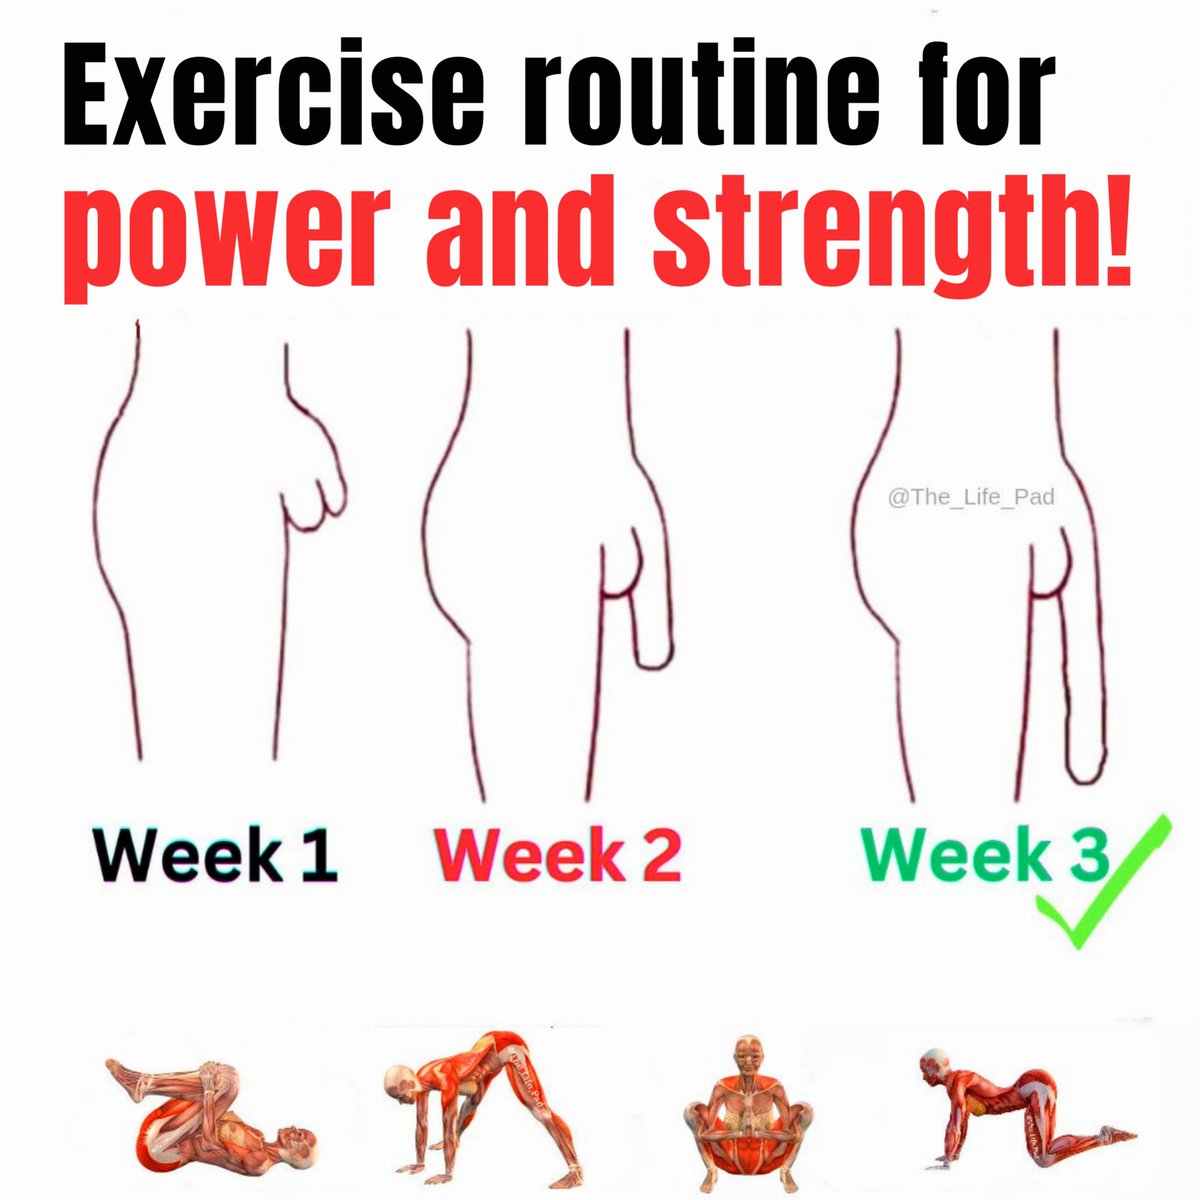 Exercise routine for power and strength, & lower abs Make your Dragon bigger and stronger in 3 weeks  🍆

(educational purpose)